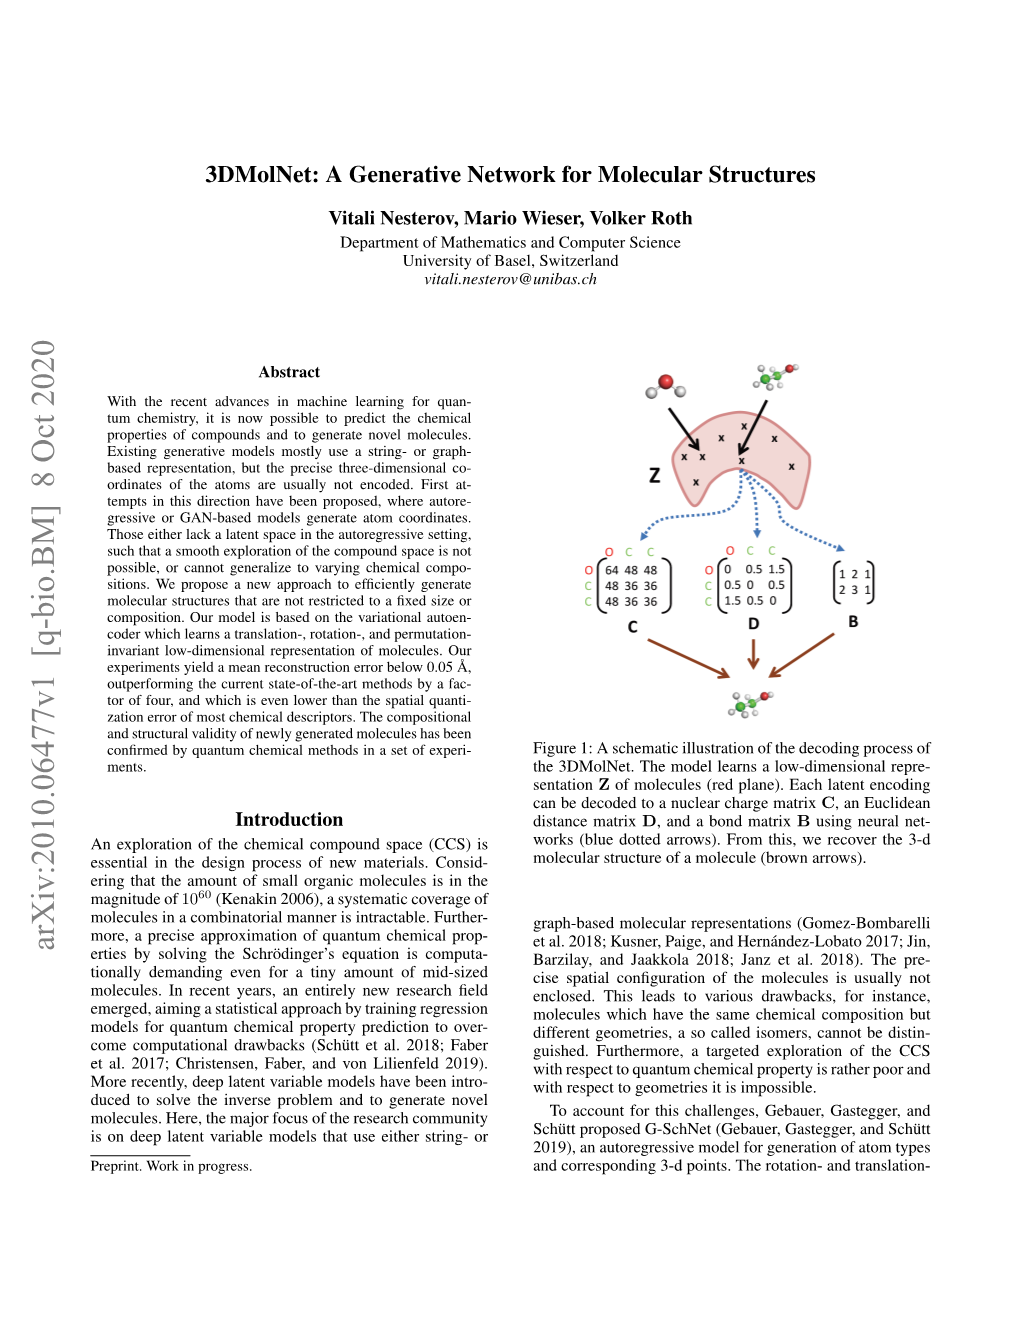 3Dmolnet: a Generative Network for Molecular Structures